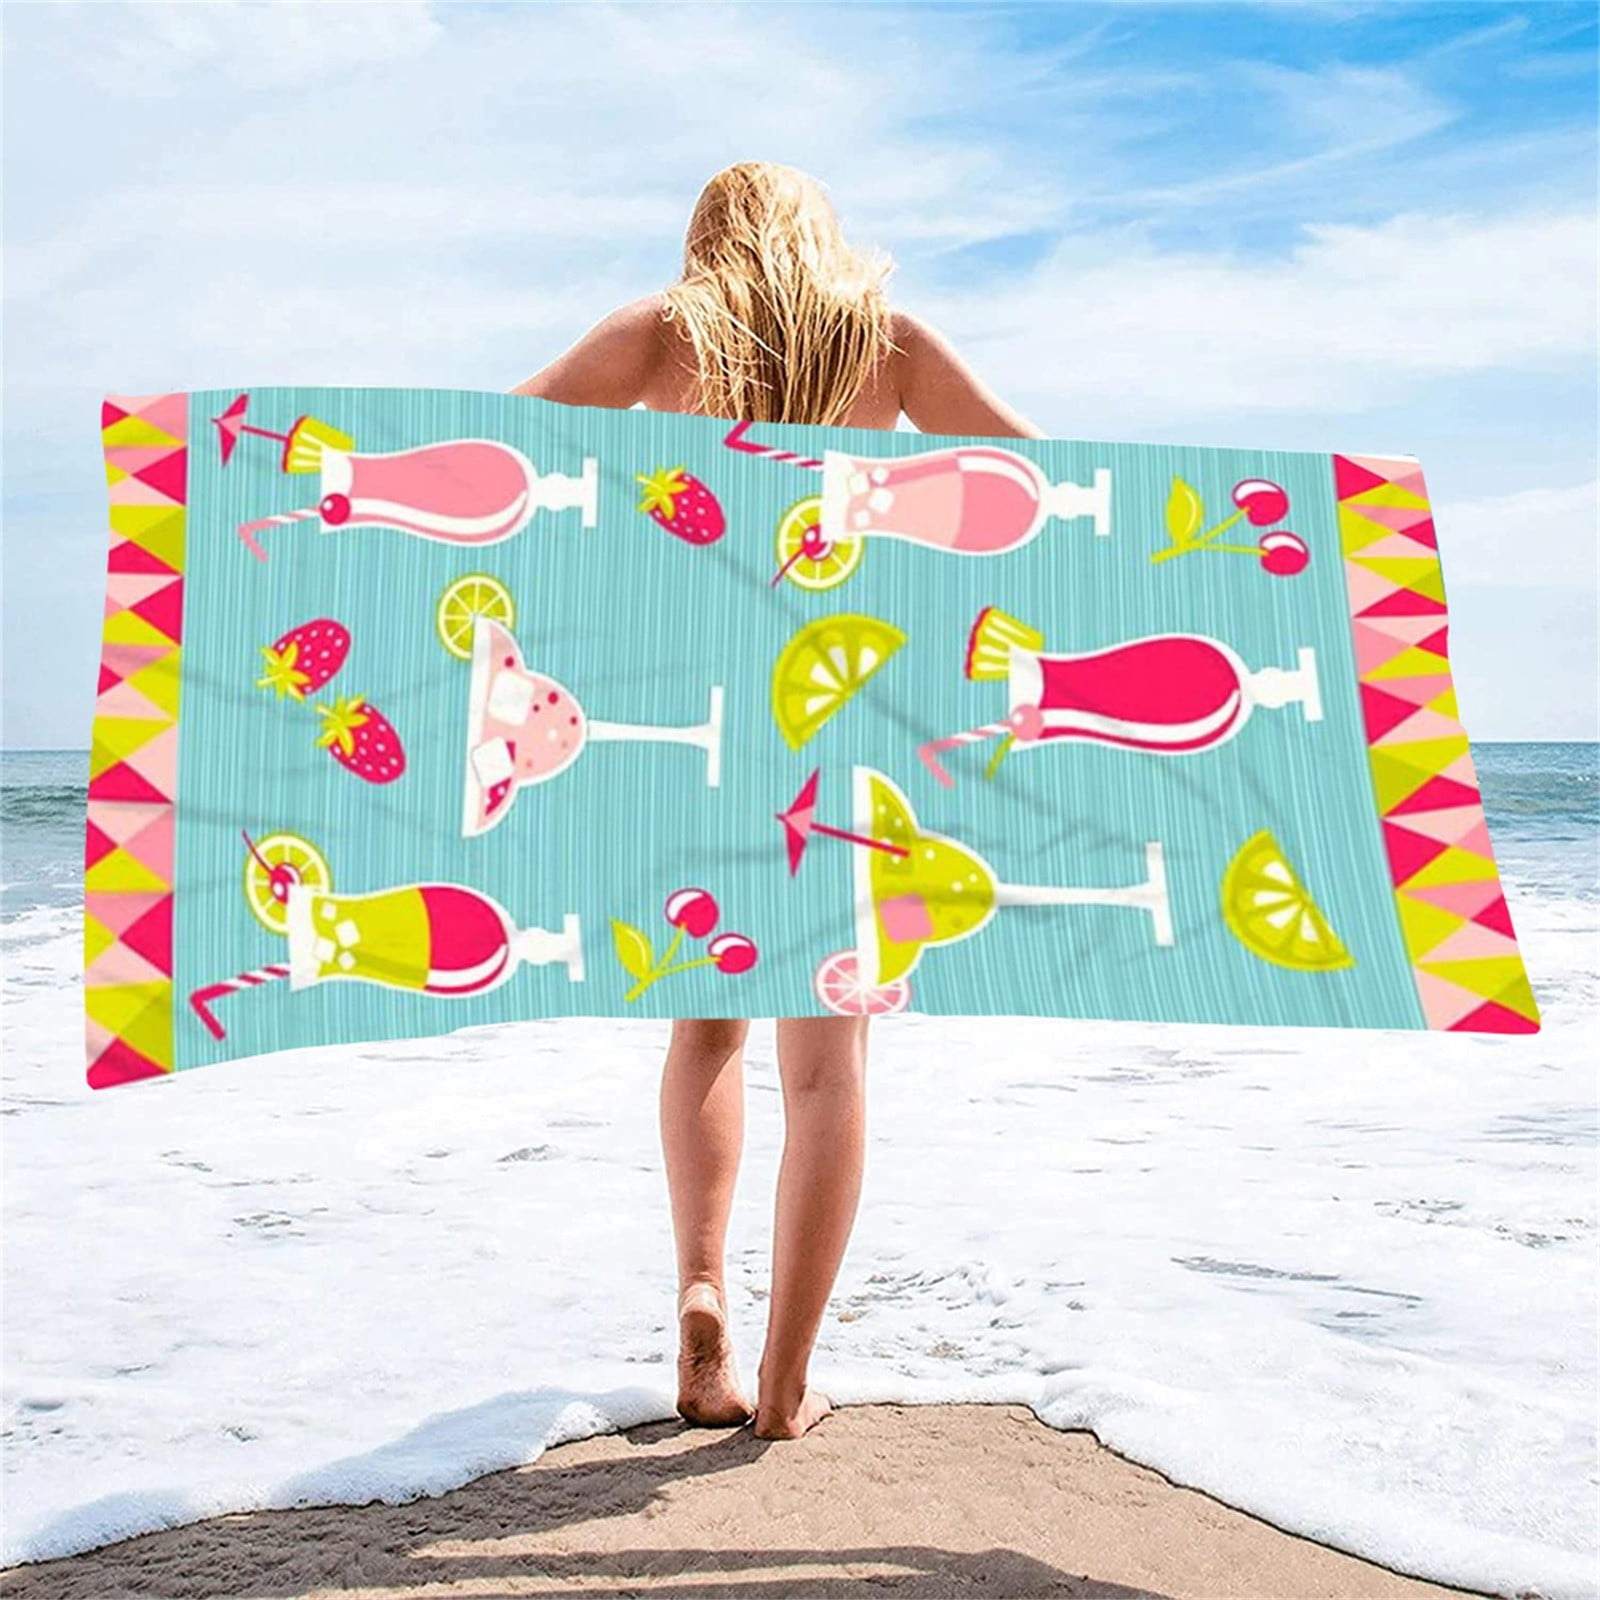 UGG Mirabelle Beach Towel - Pool Party